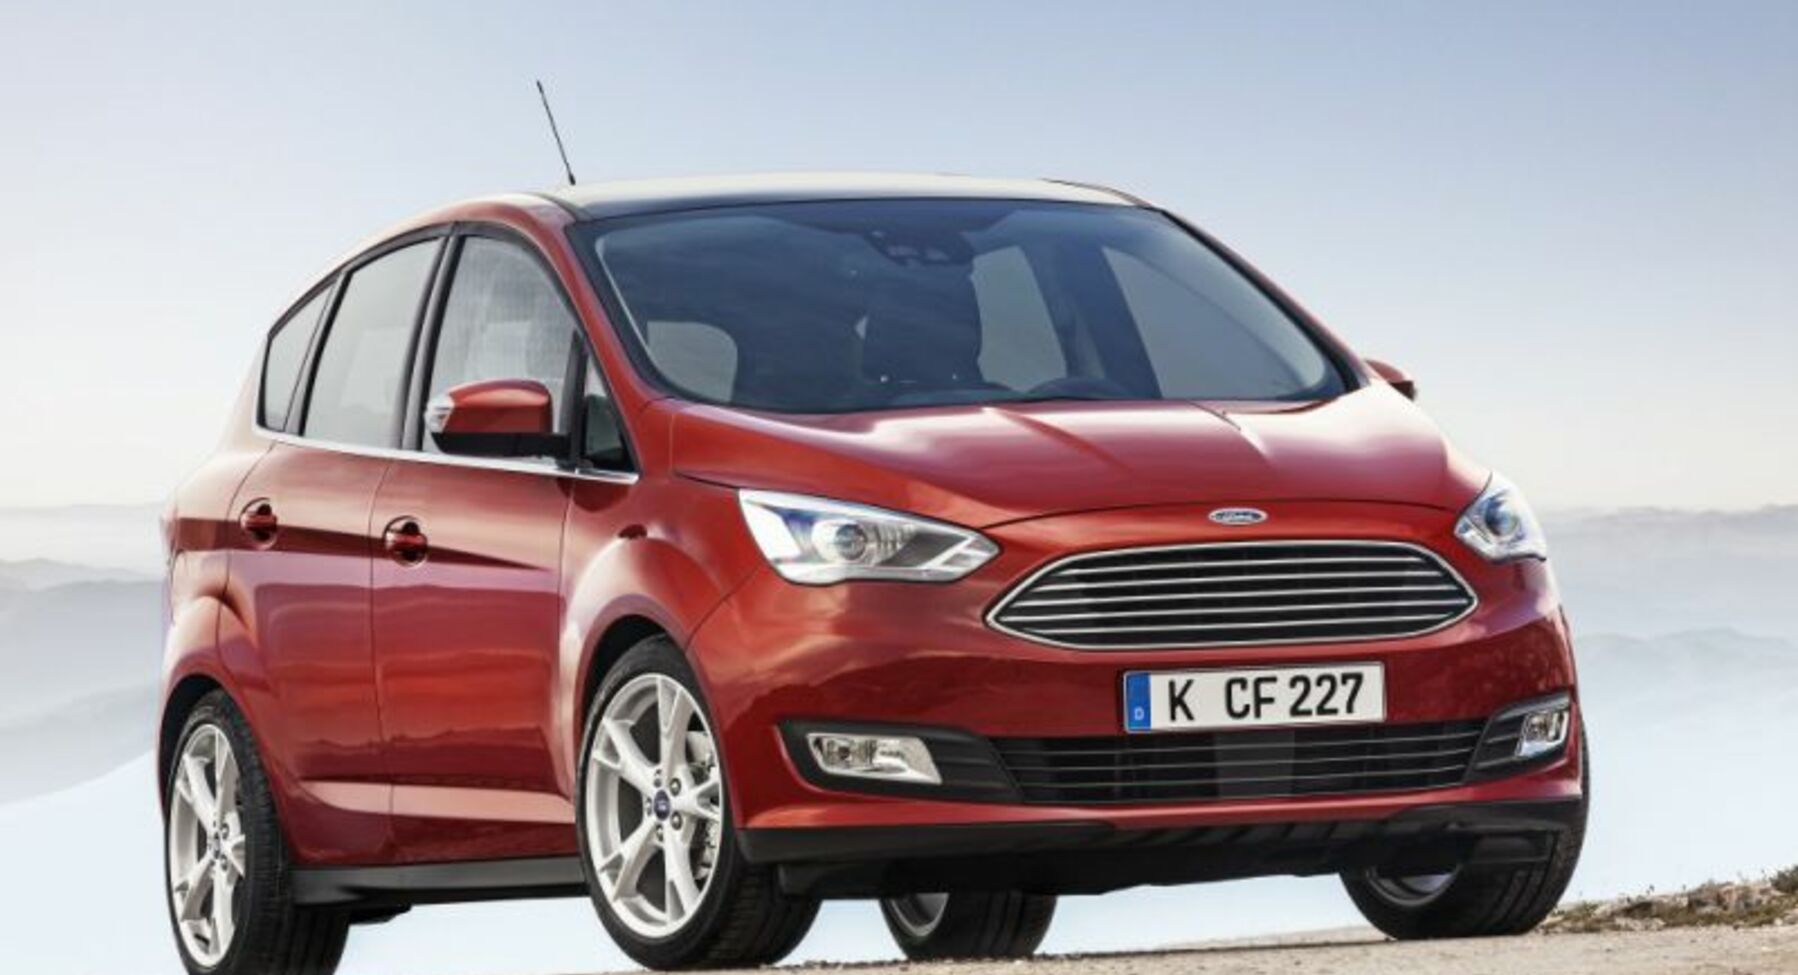 Ford C-MAX II (facelift 2015) 2.0 TDCi (170 Hp) PowerShift S&S 2015, 2016, 2017, 2018, 2019, 2020, 2021